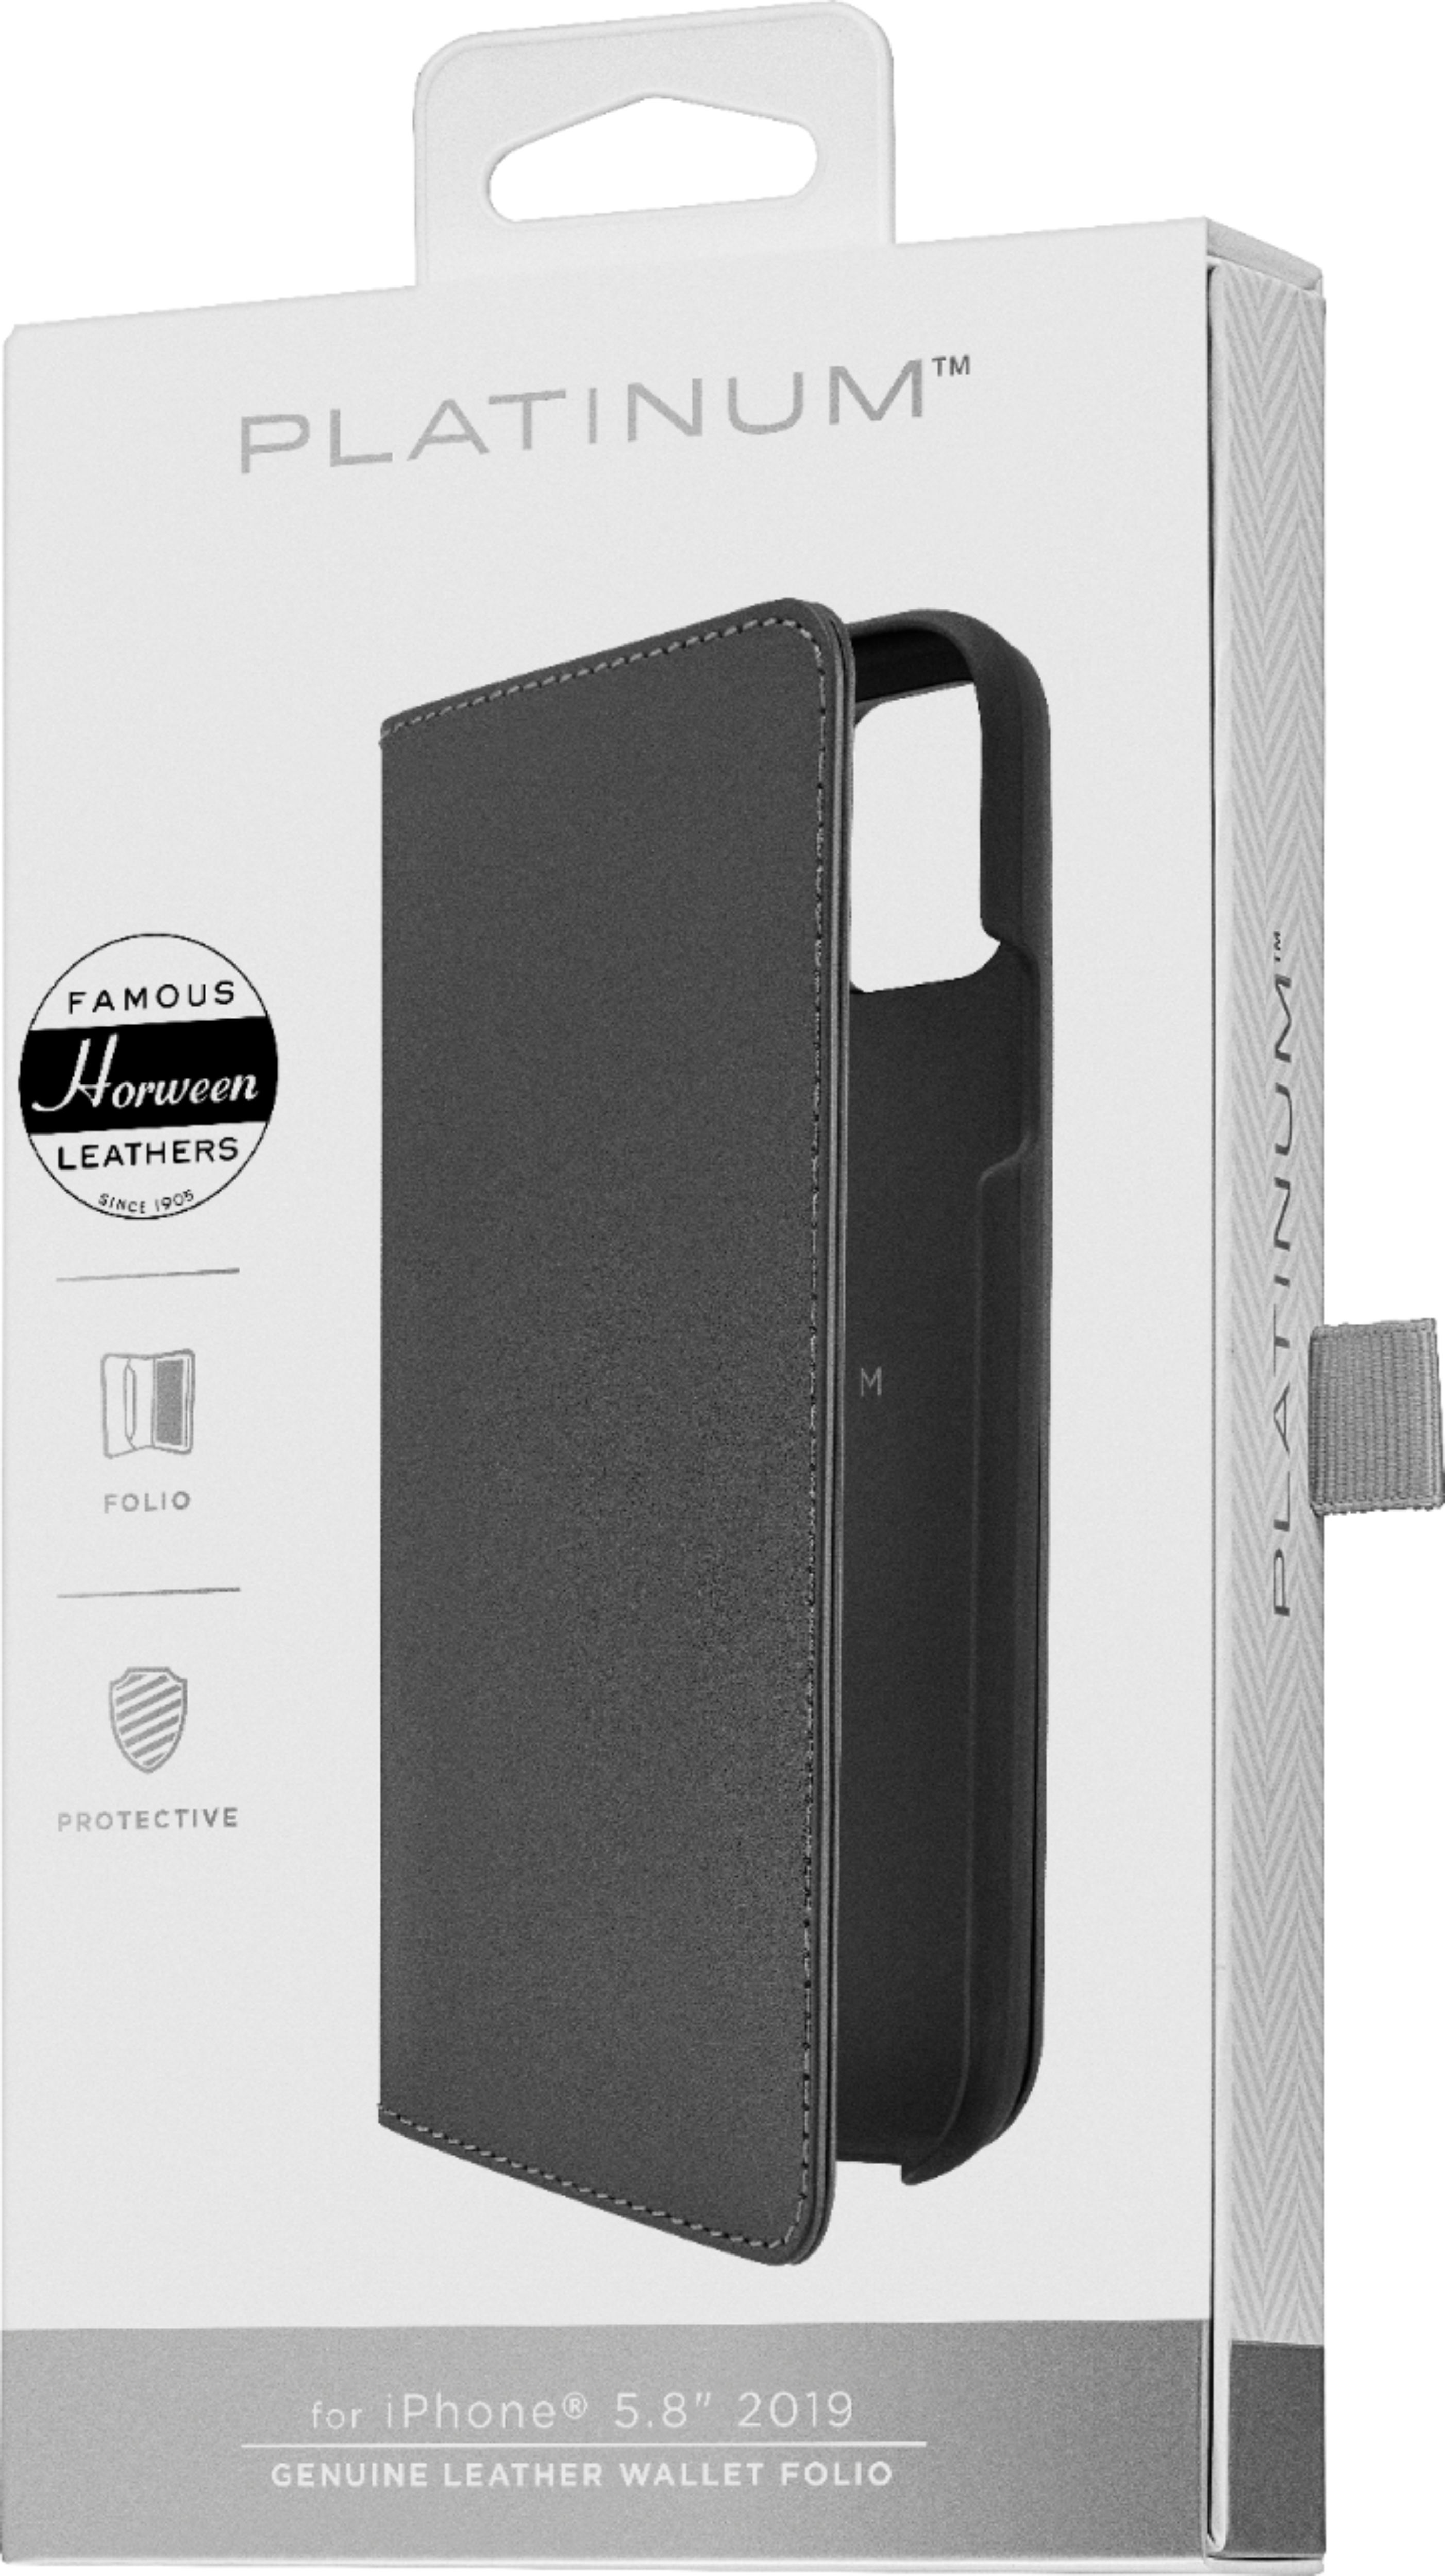 iPhone 11 Pro Case Crave Vegan Leather Wallet, Leather Guard Series